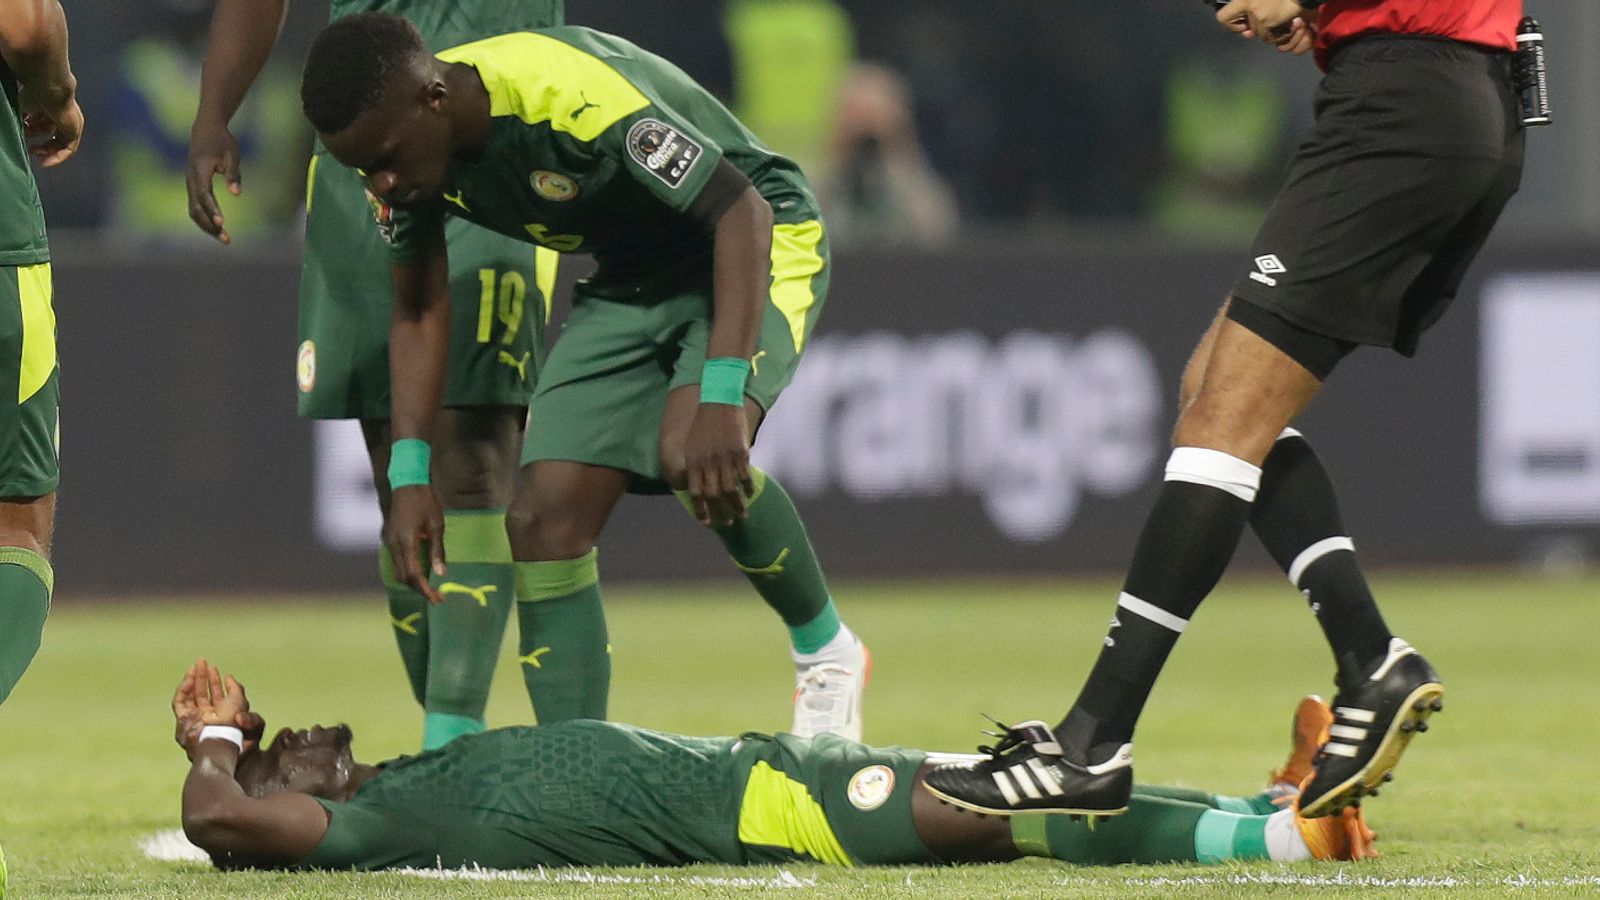 'Sadio Mane's health put at risk': Brain charity Headway criticises decision to keep Liverpool player on after clash of heads in Senegal's AFCON win - Sky Sports